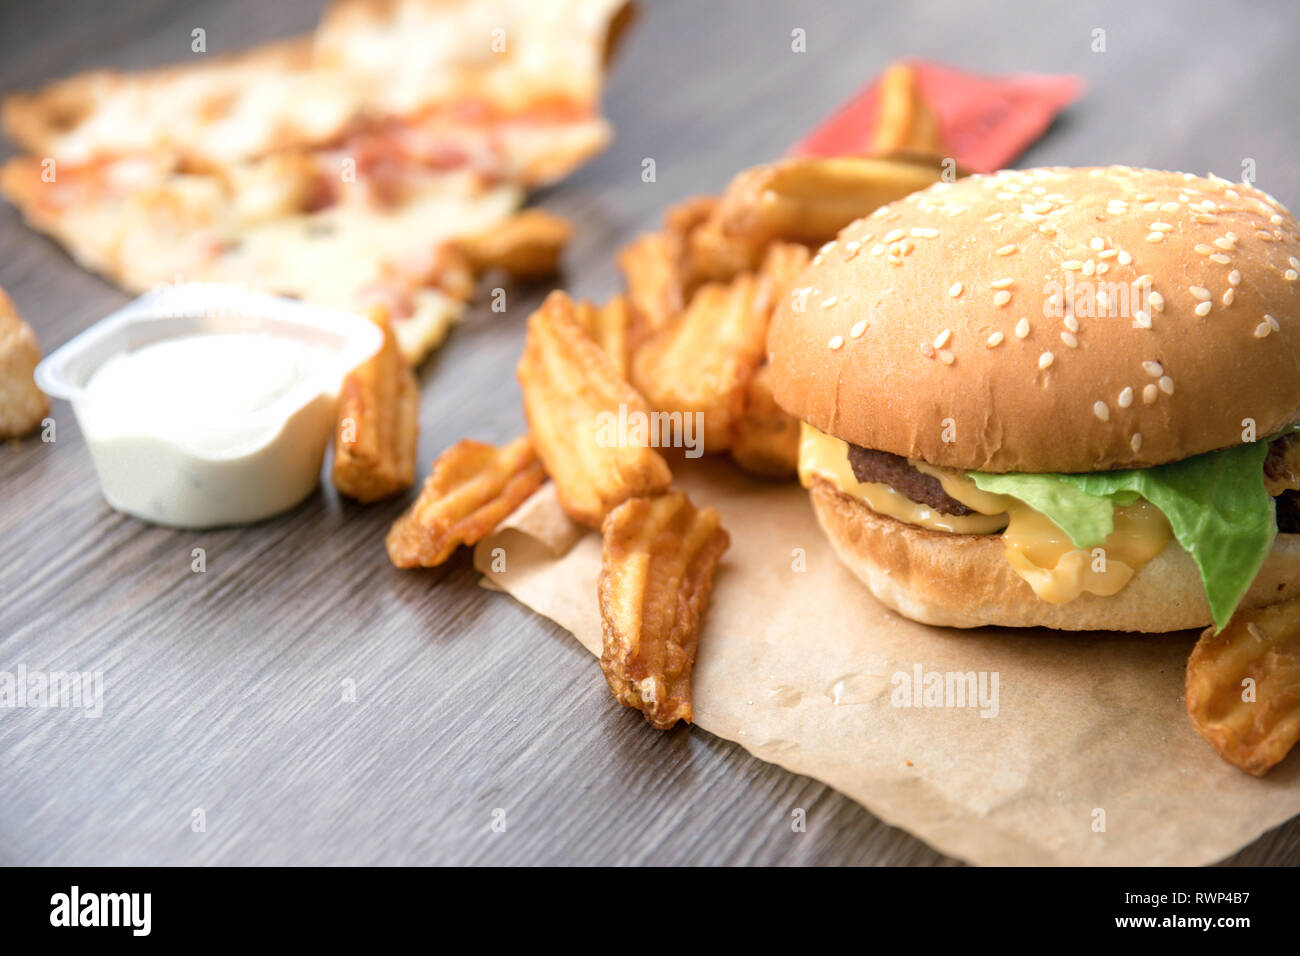 Fast food. Hamburger, french fries deluxe, pizza, cheese, lettuce and sour cream sauce. Stock Photo